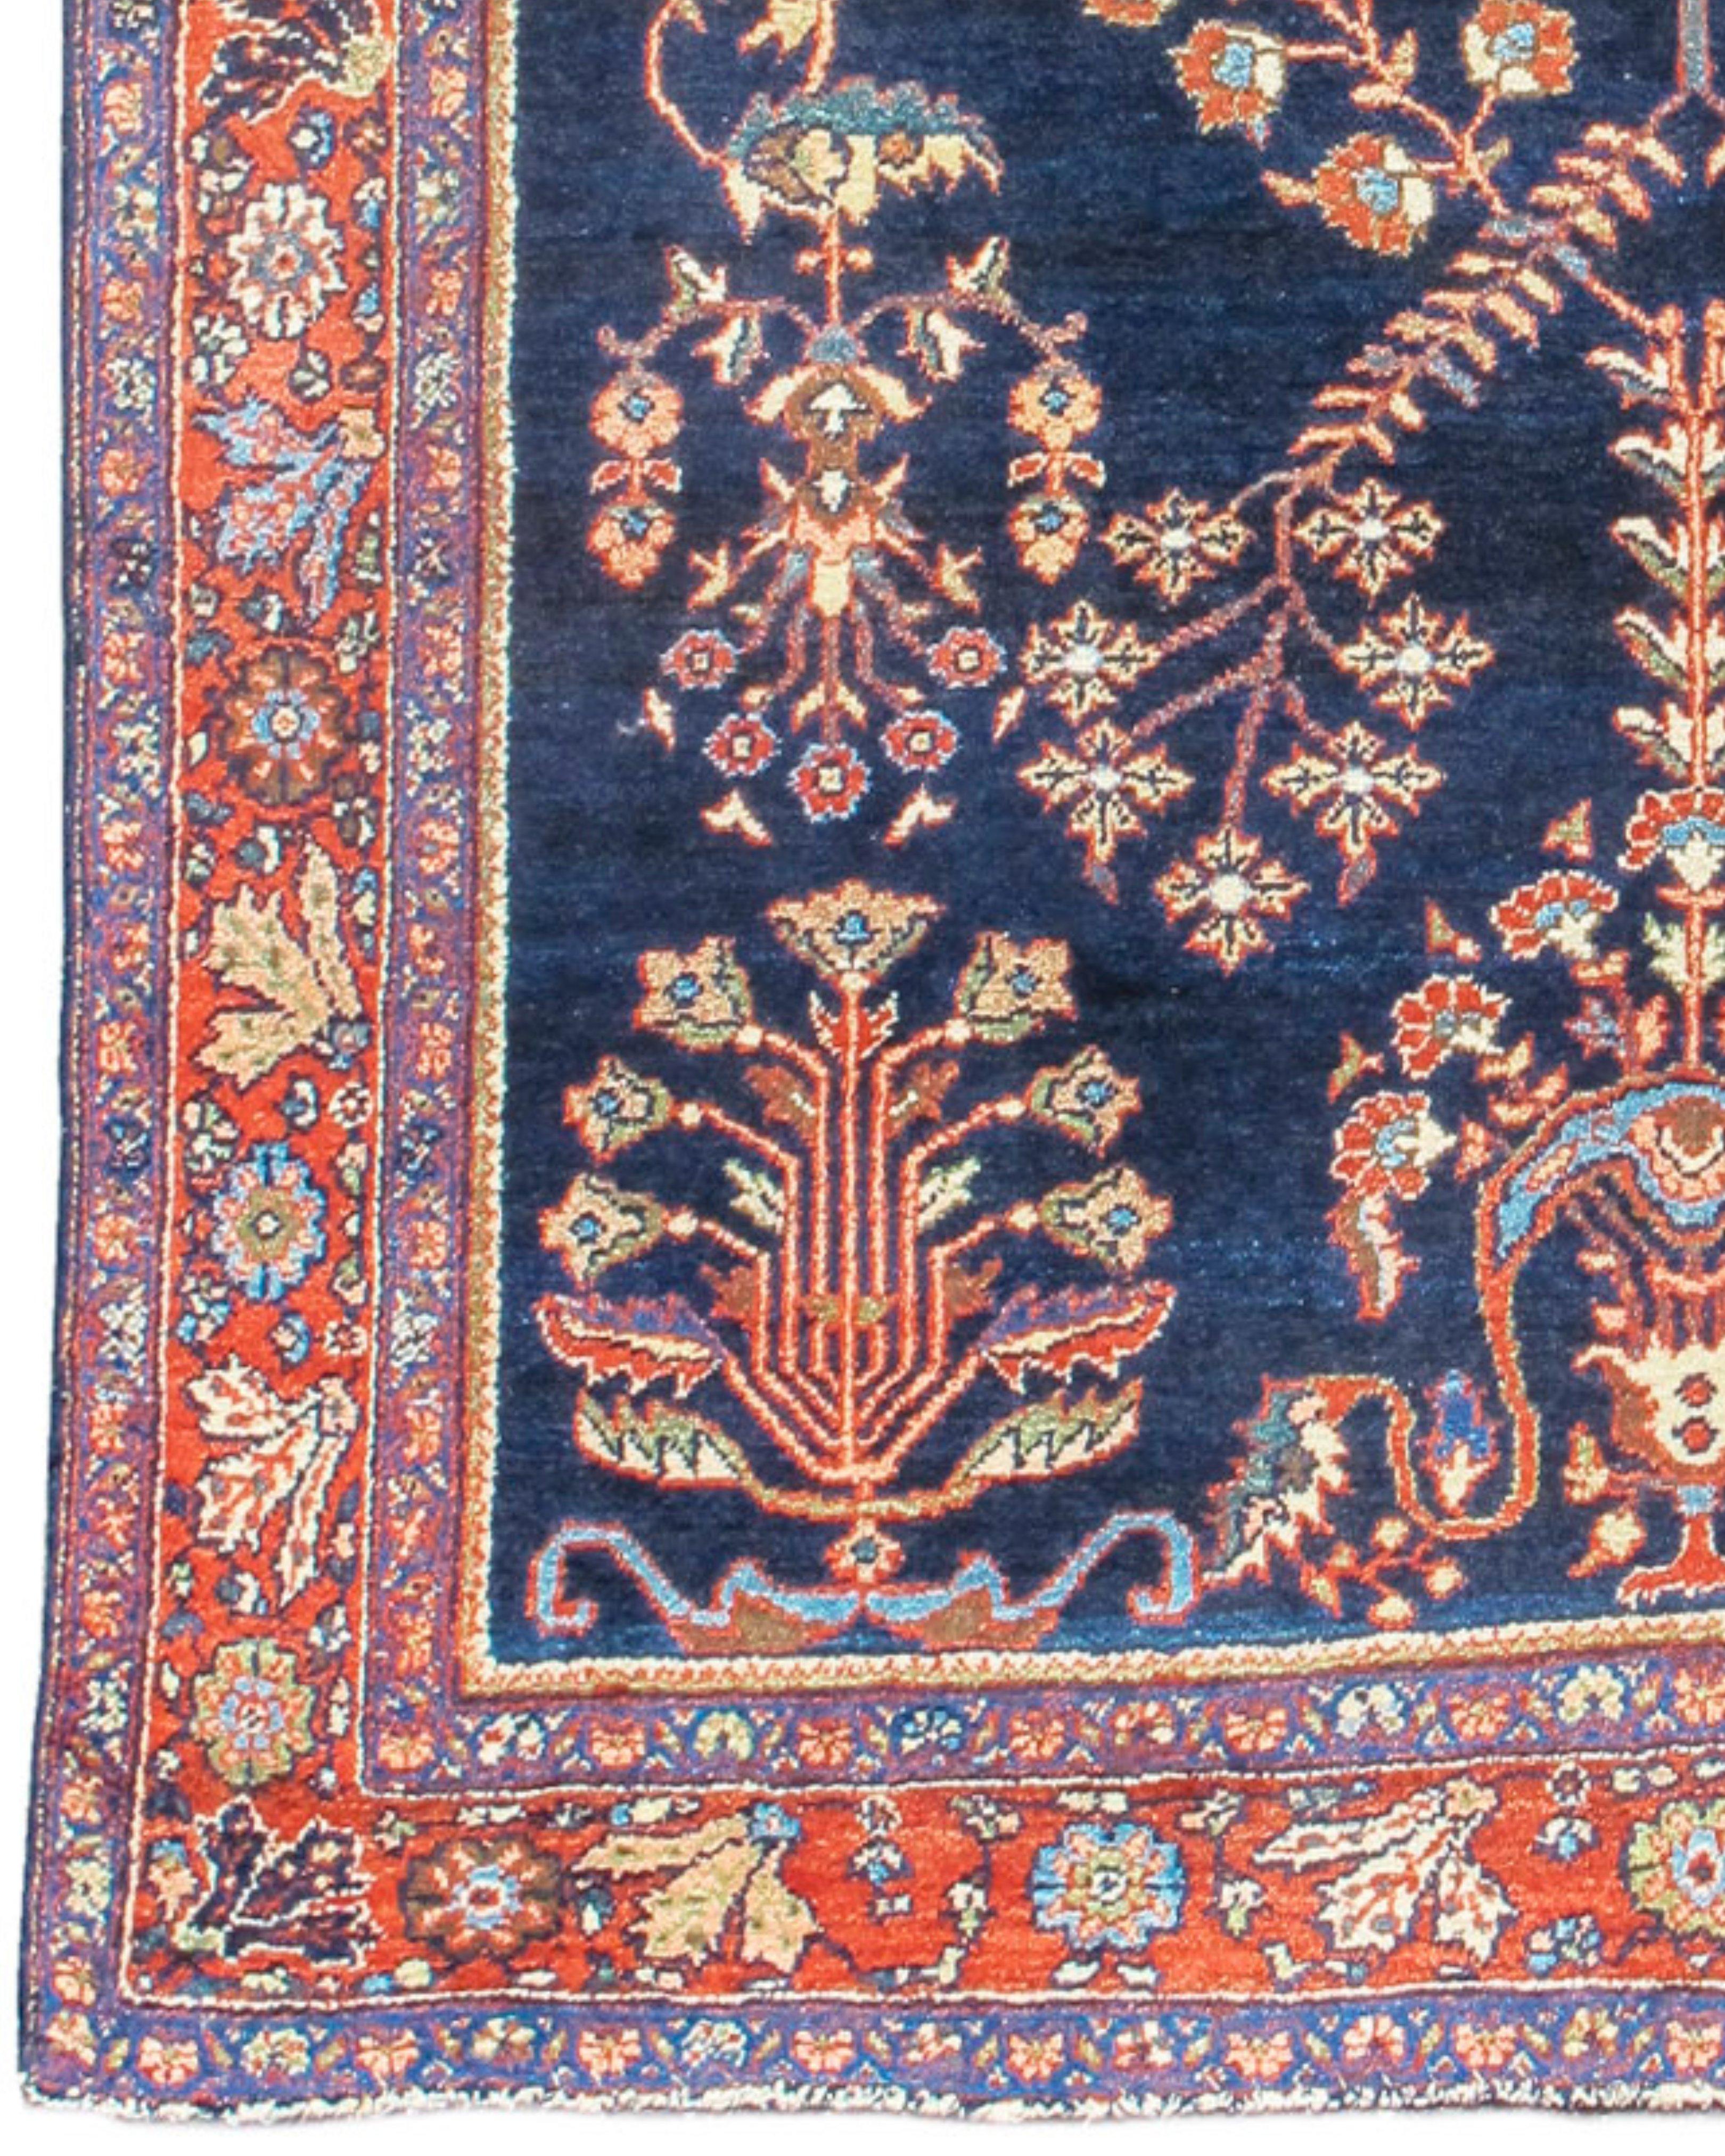 Sarouk Rug, Early 20th Century In Excellent Condition For Sale In San Francisco, CA